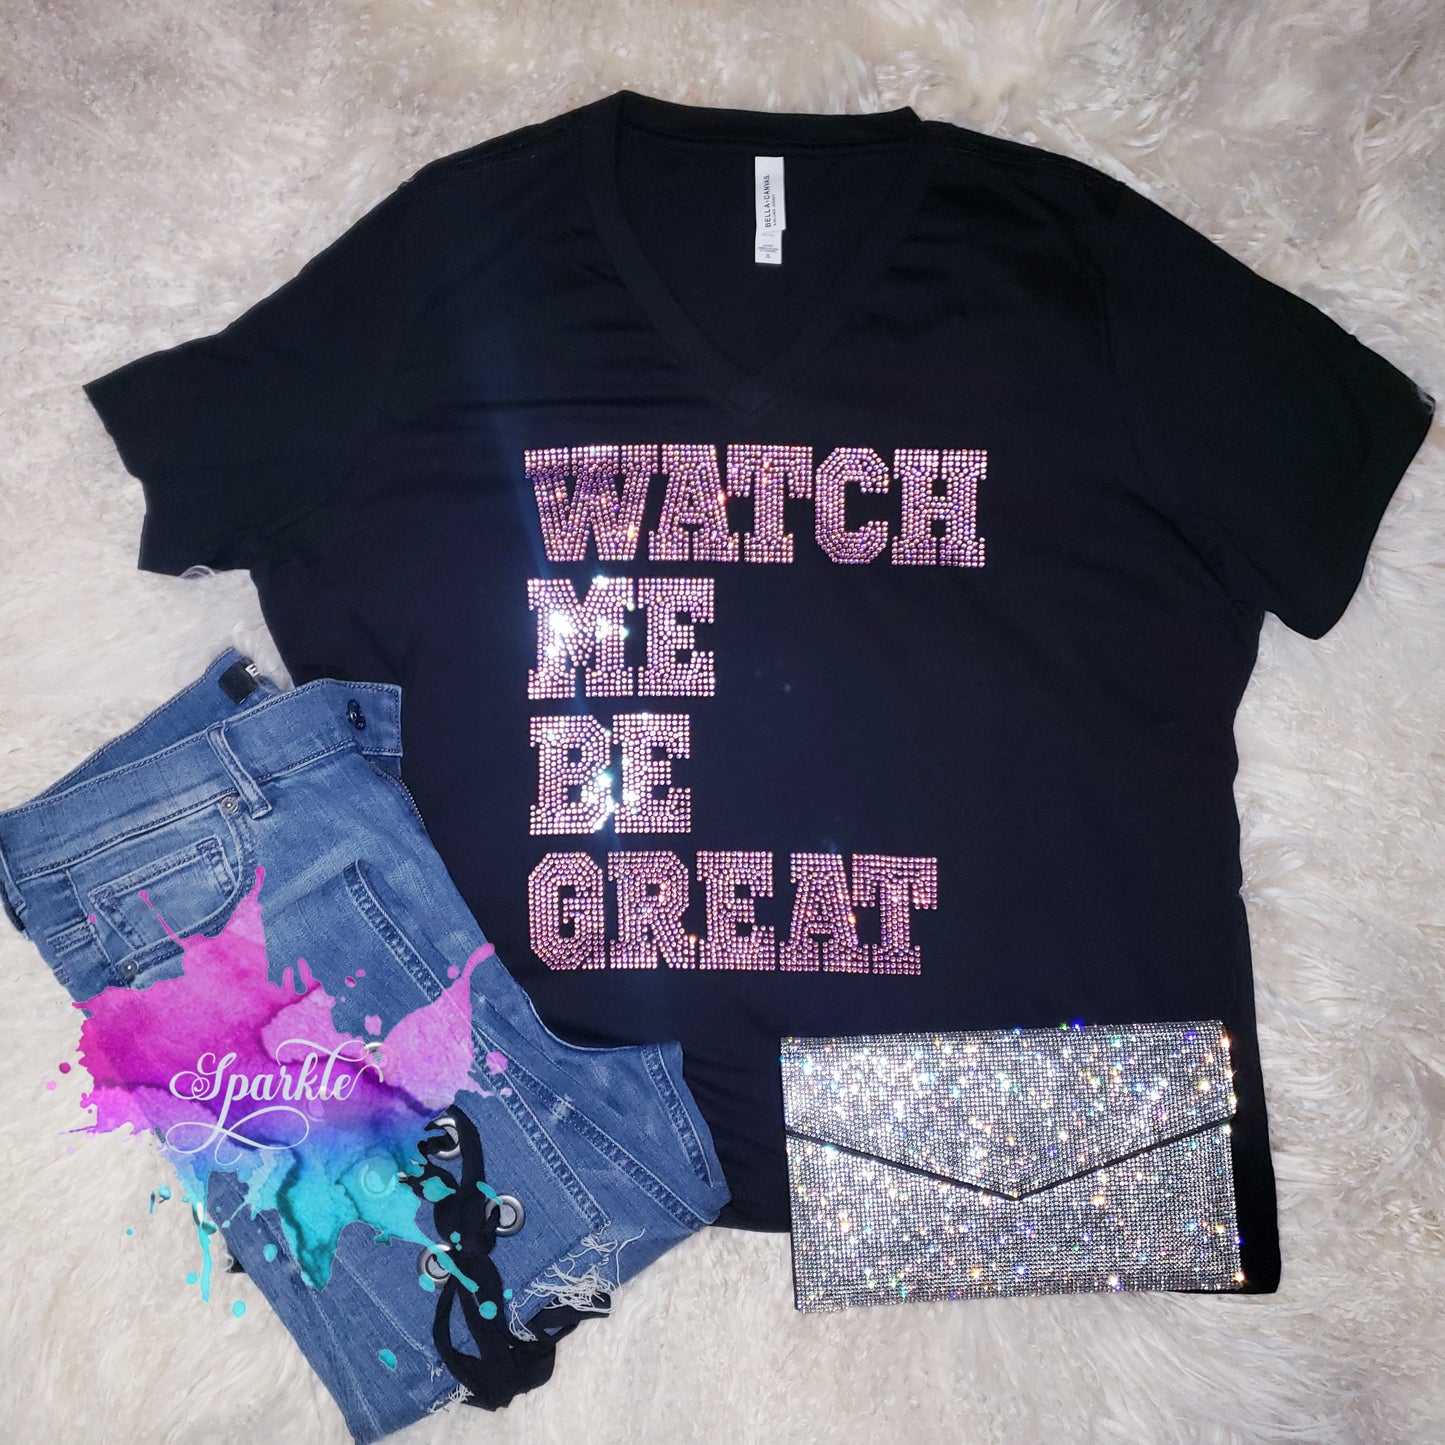 Watch Me Be Great Crystallized Tee